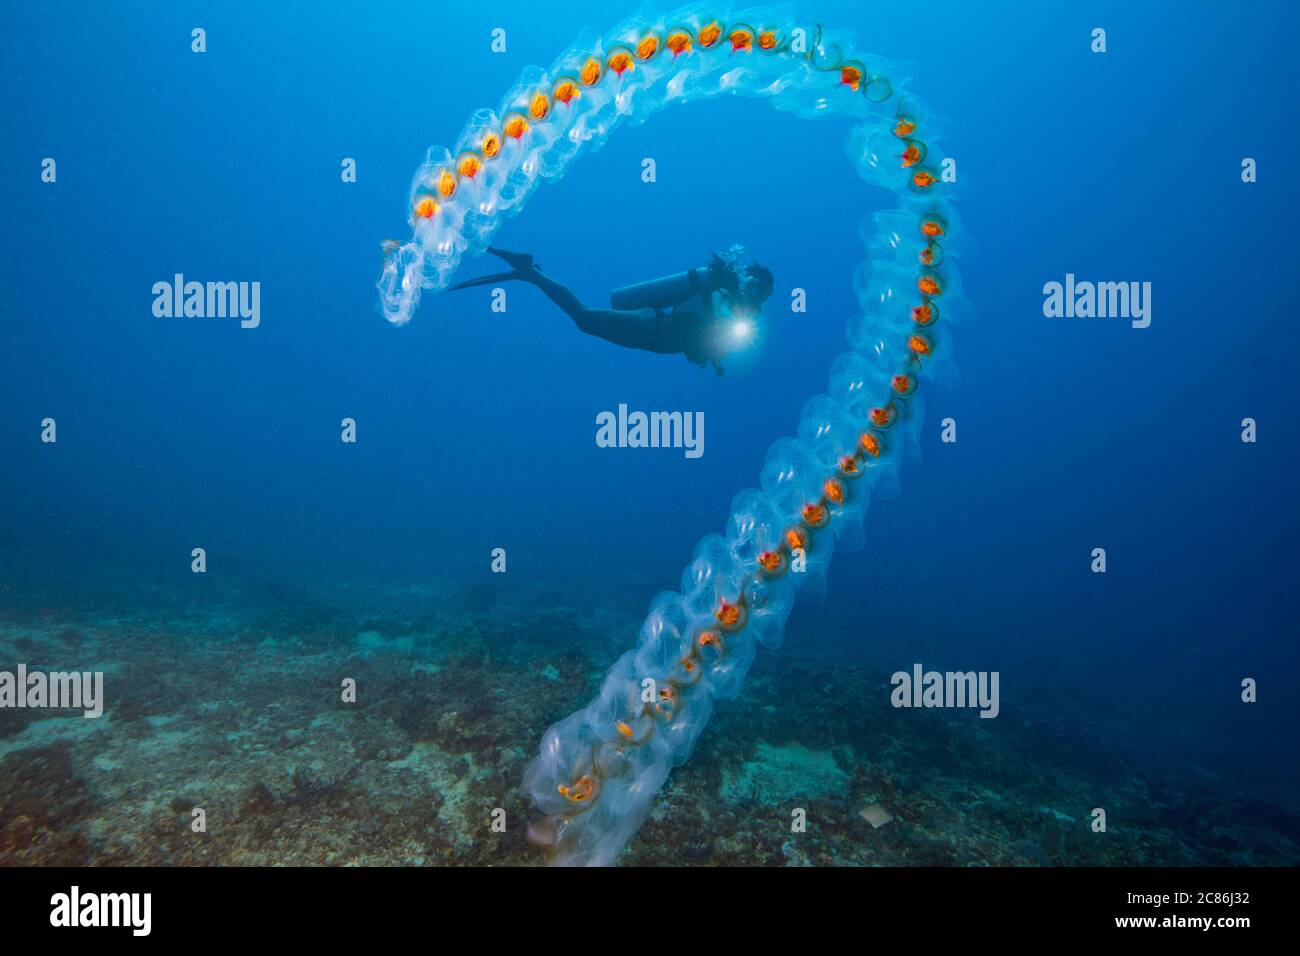 A chain of Salps, Salpa sp., on Monad Shoal off Malapascua Island in the Philippines. Stock Photo